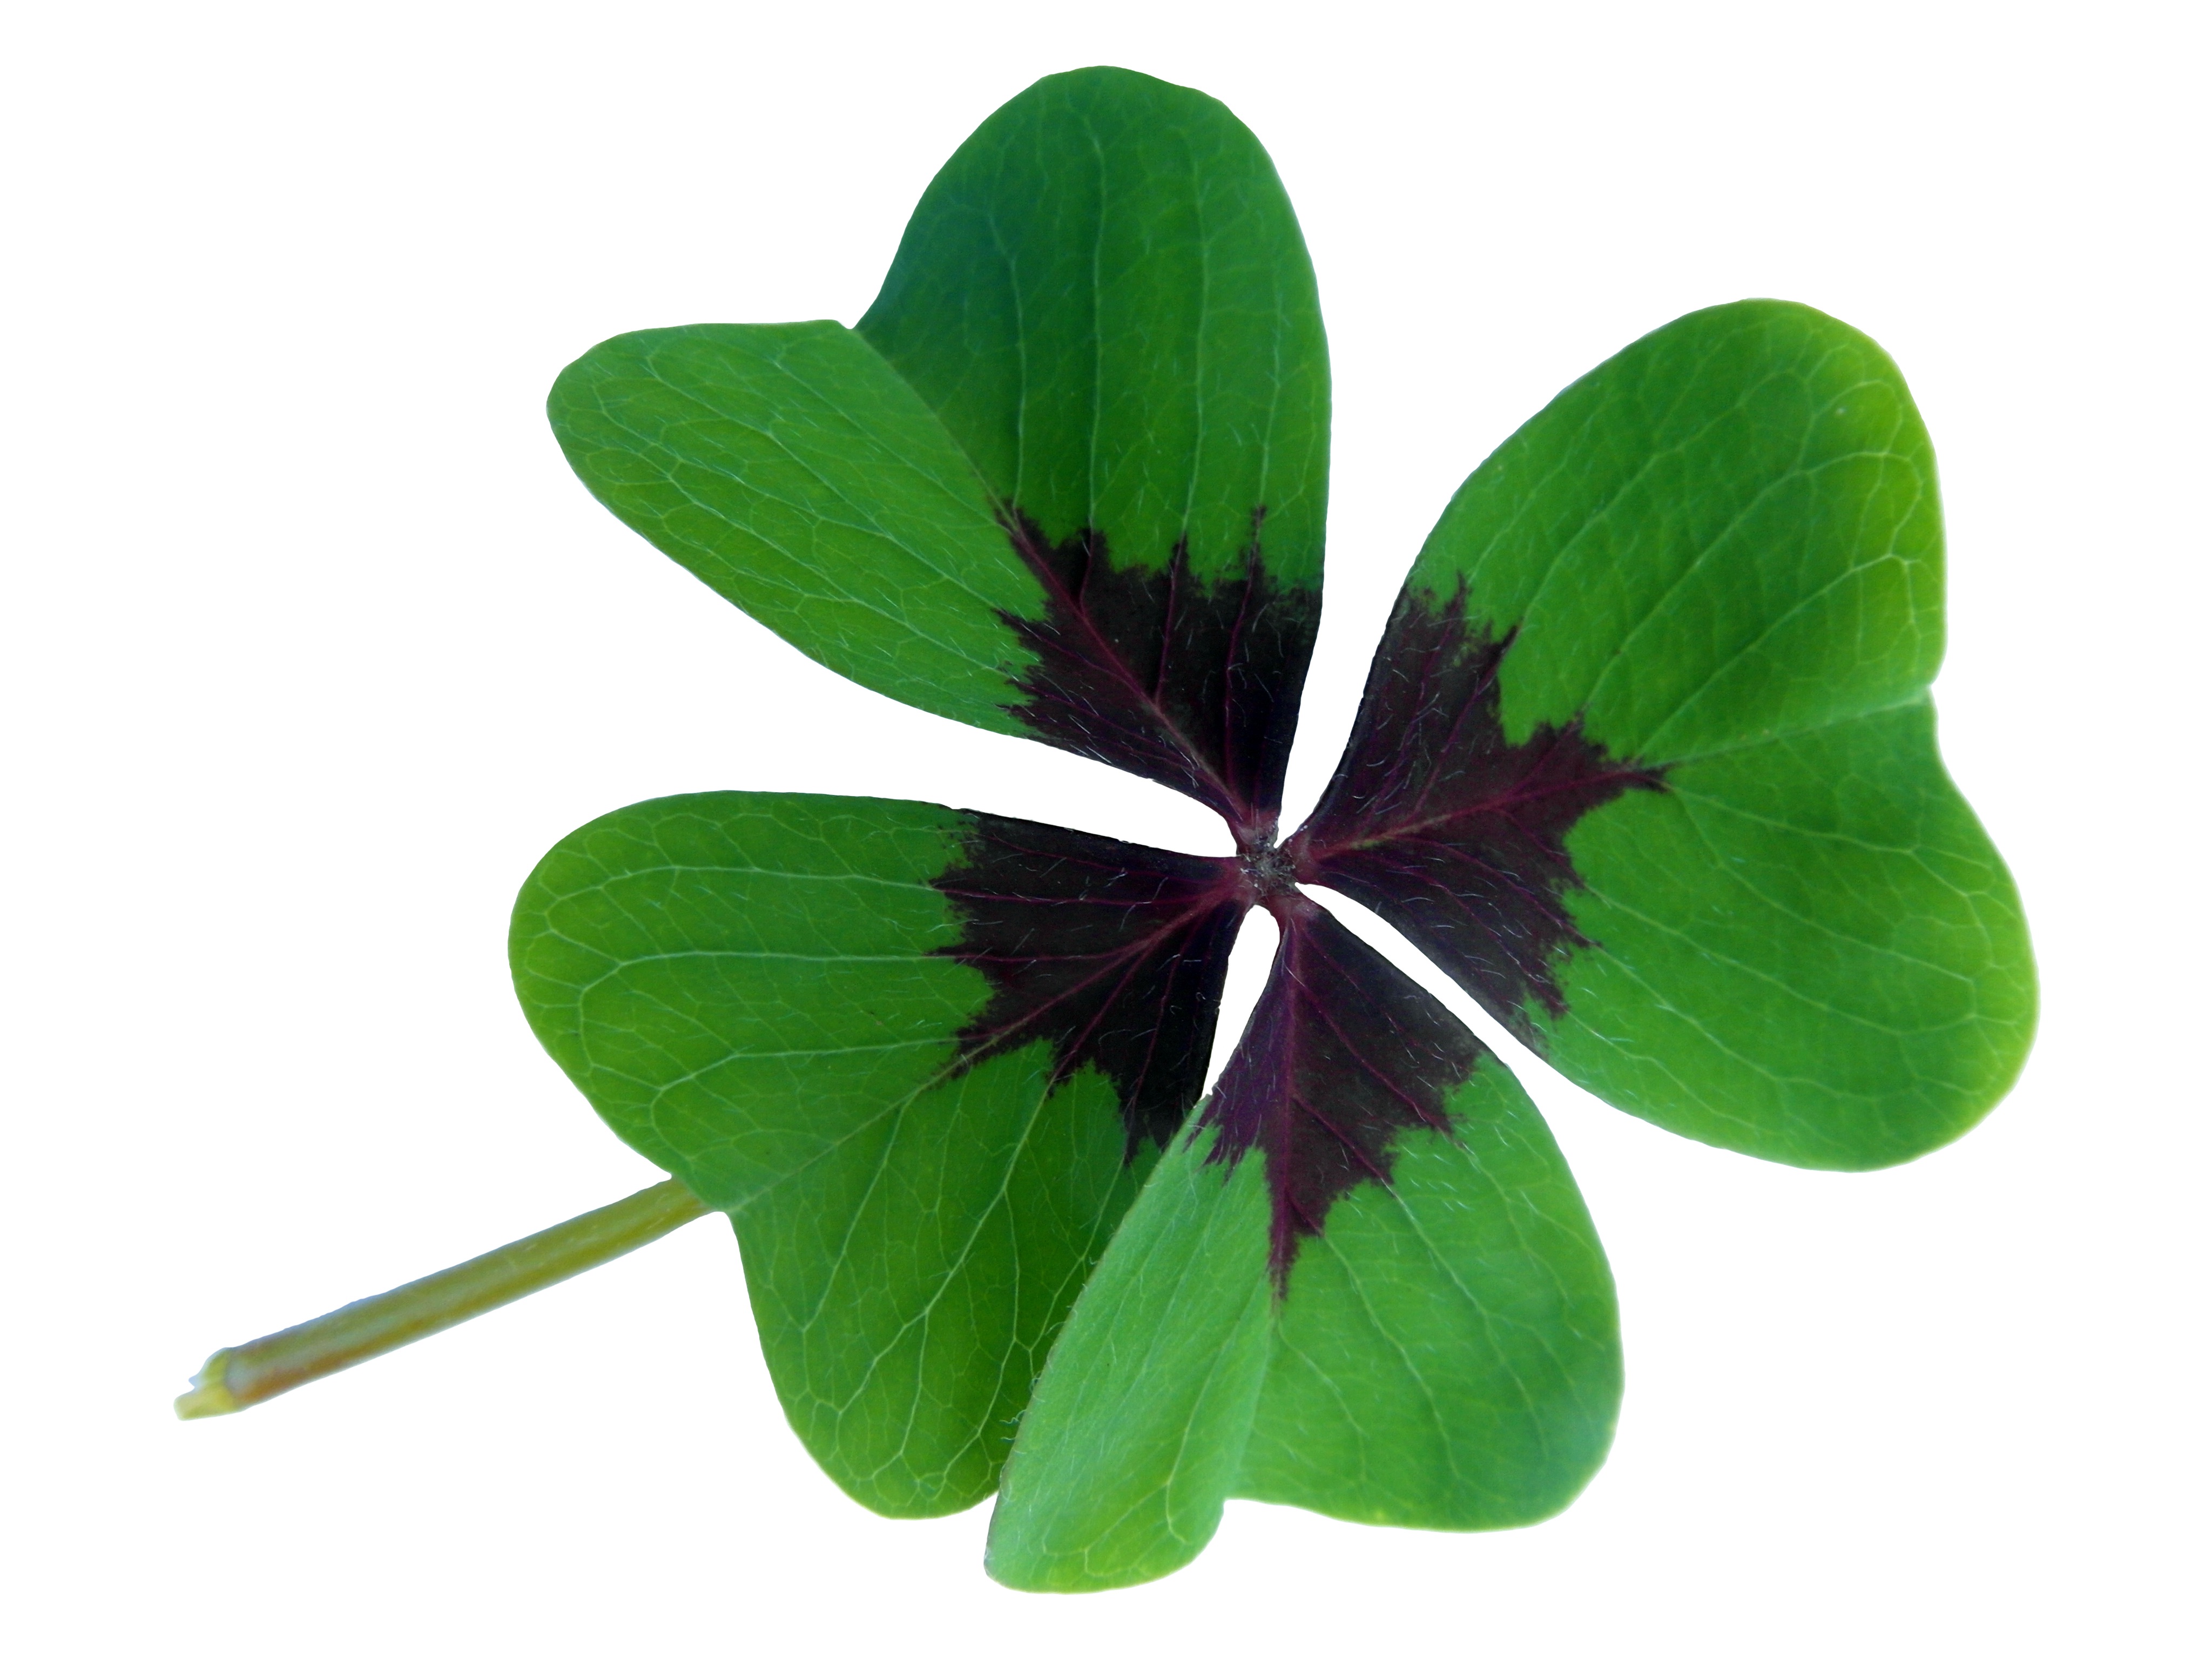 Clover on a white background